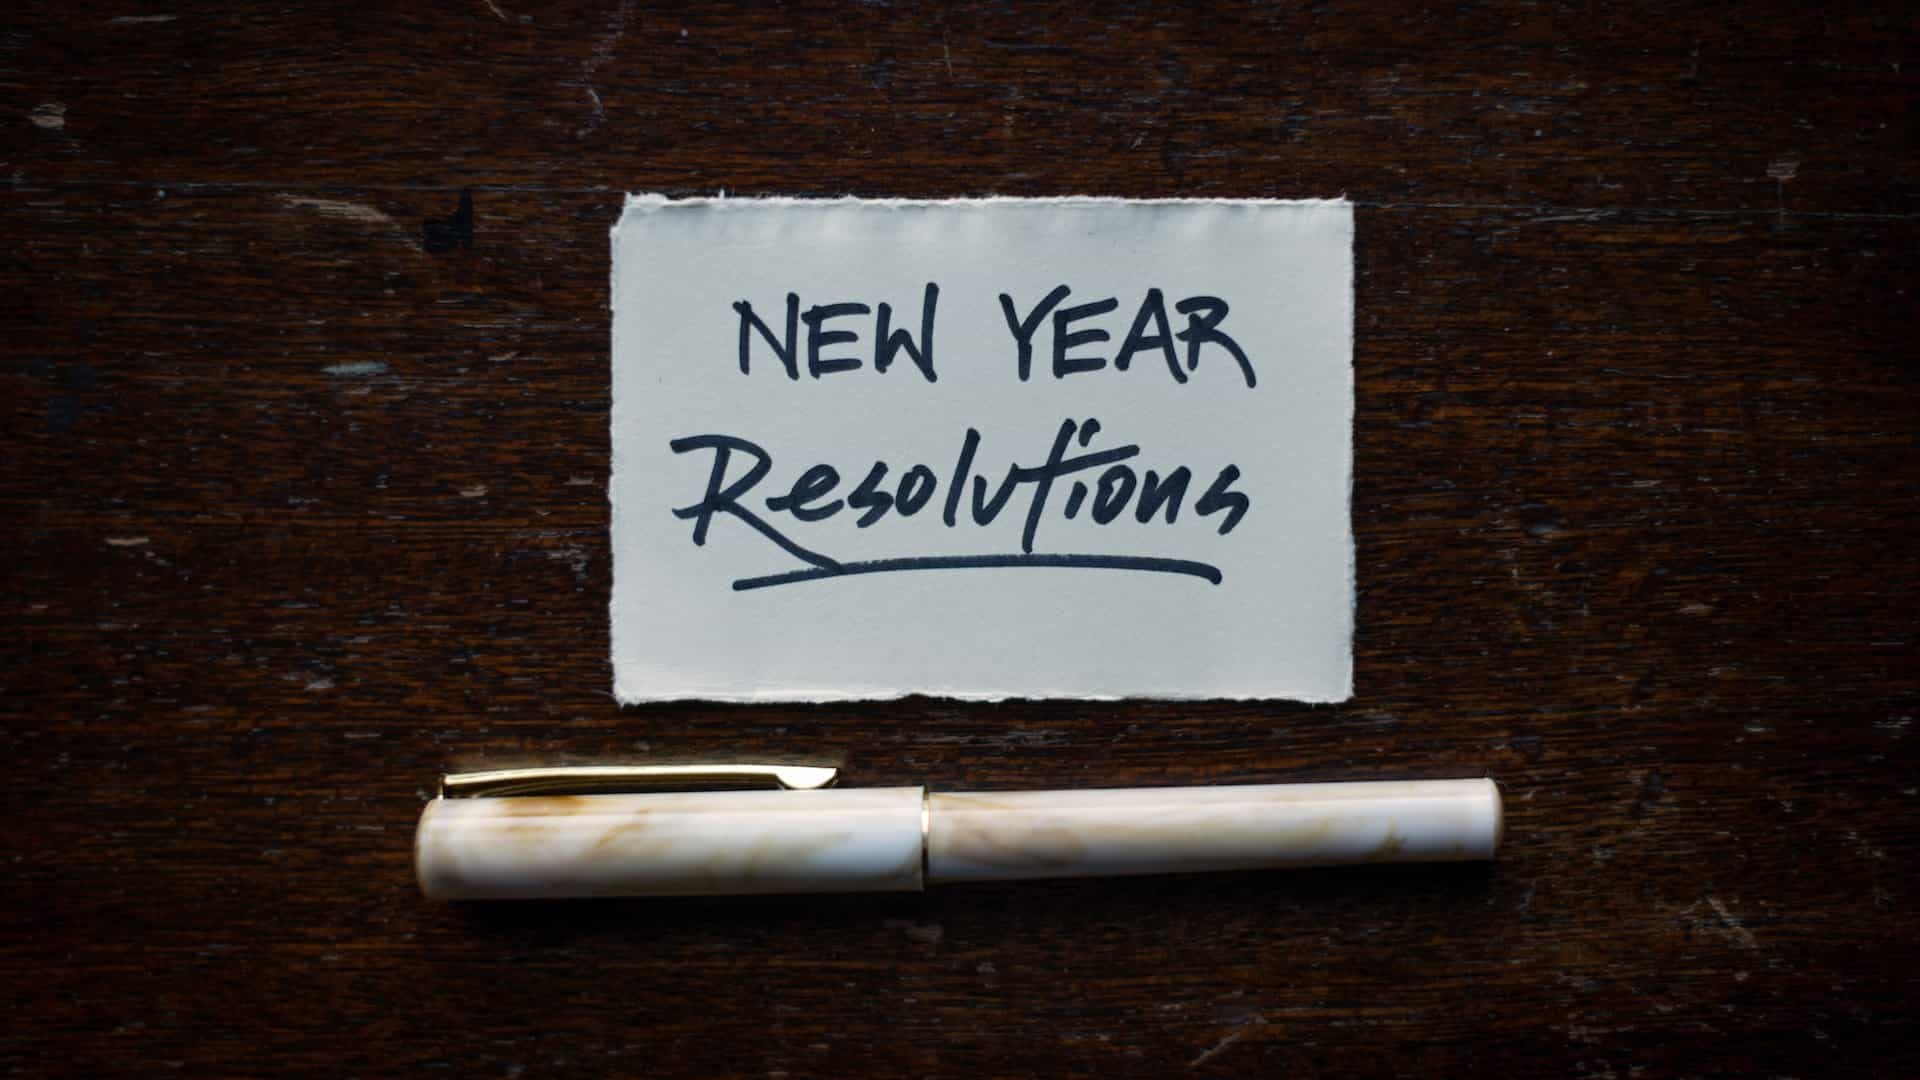 What is Stopping You From Achieving Your New Year's Resolution?